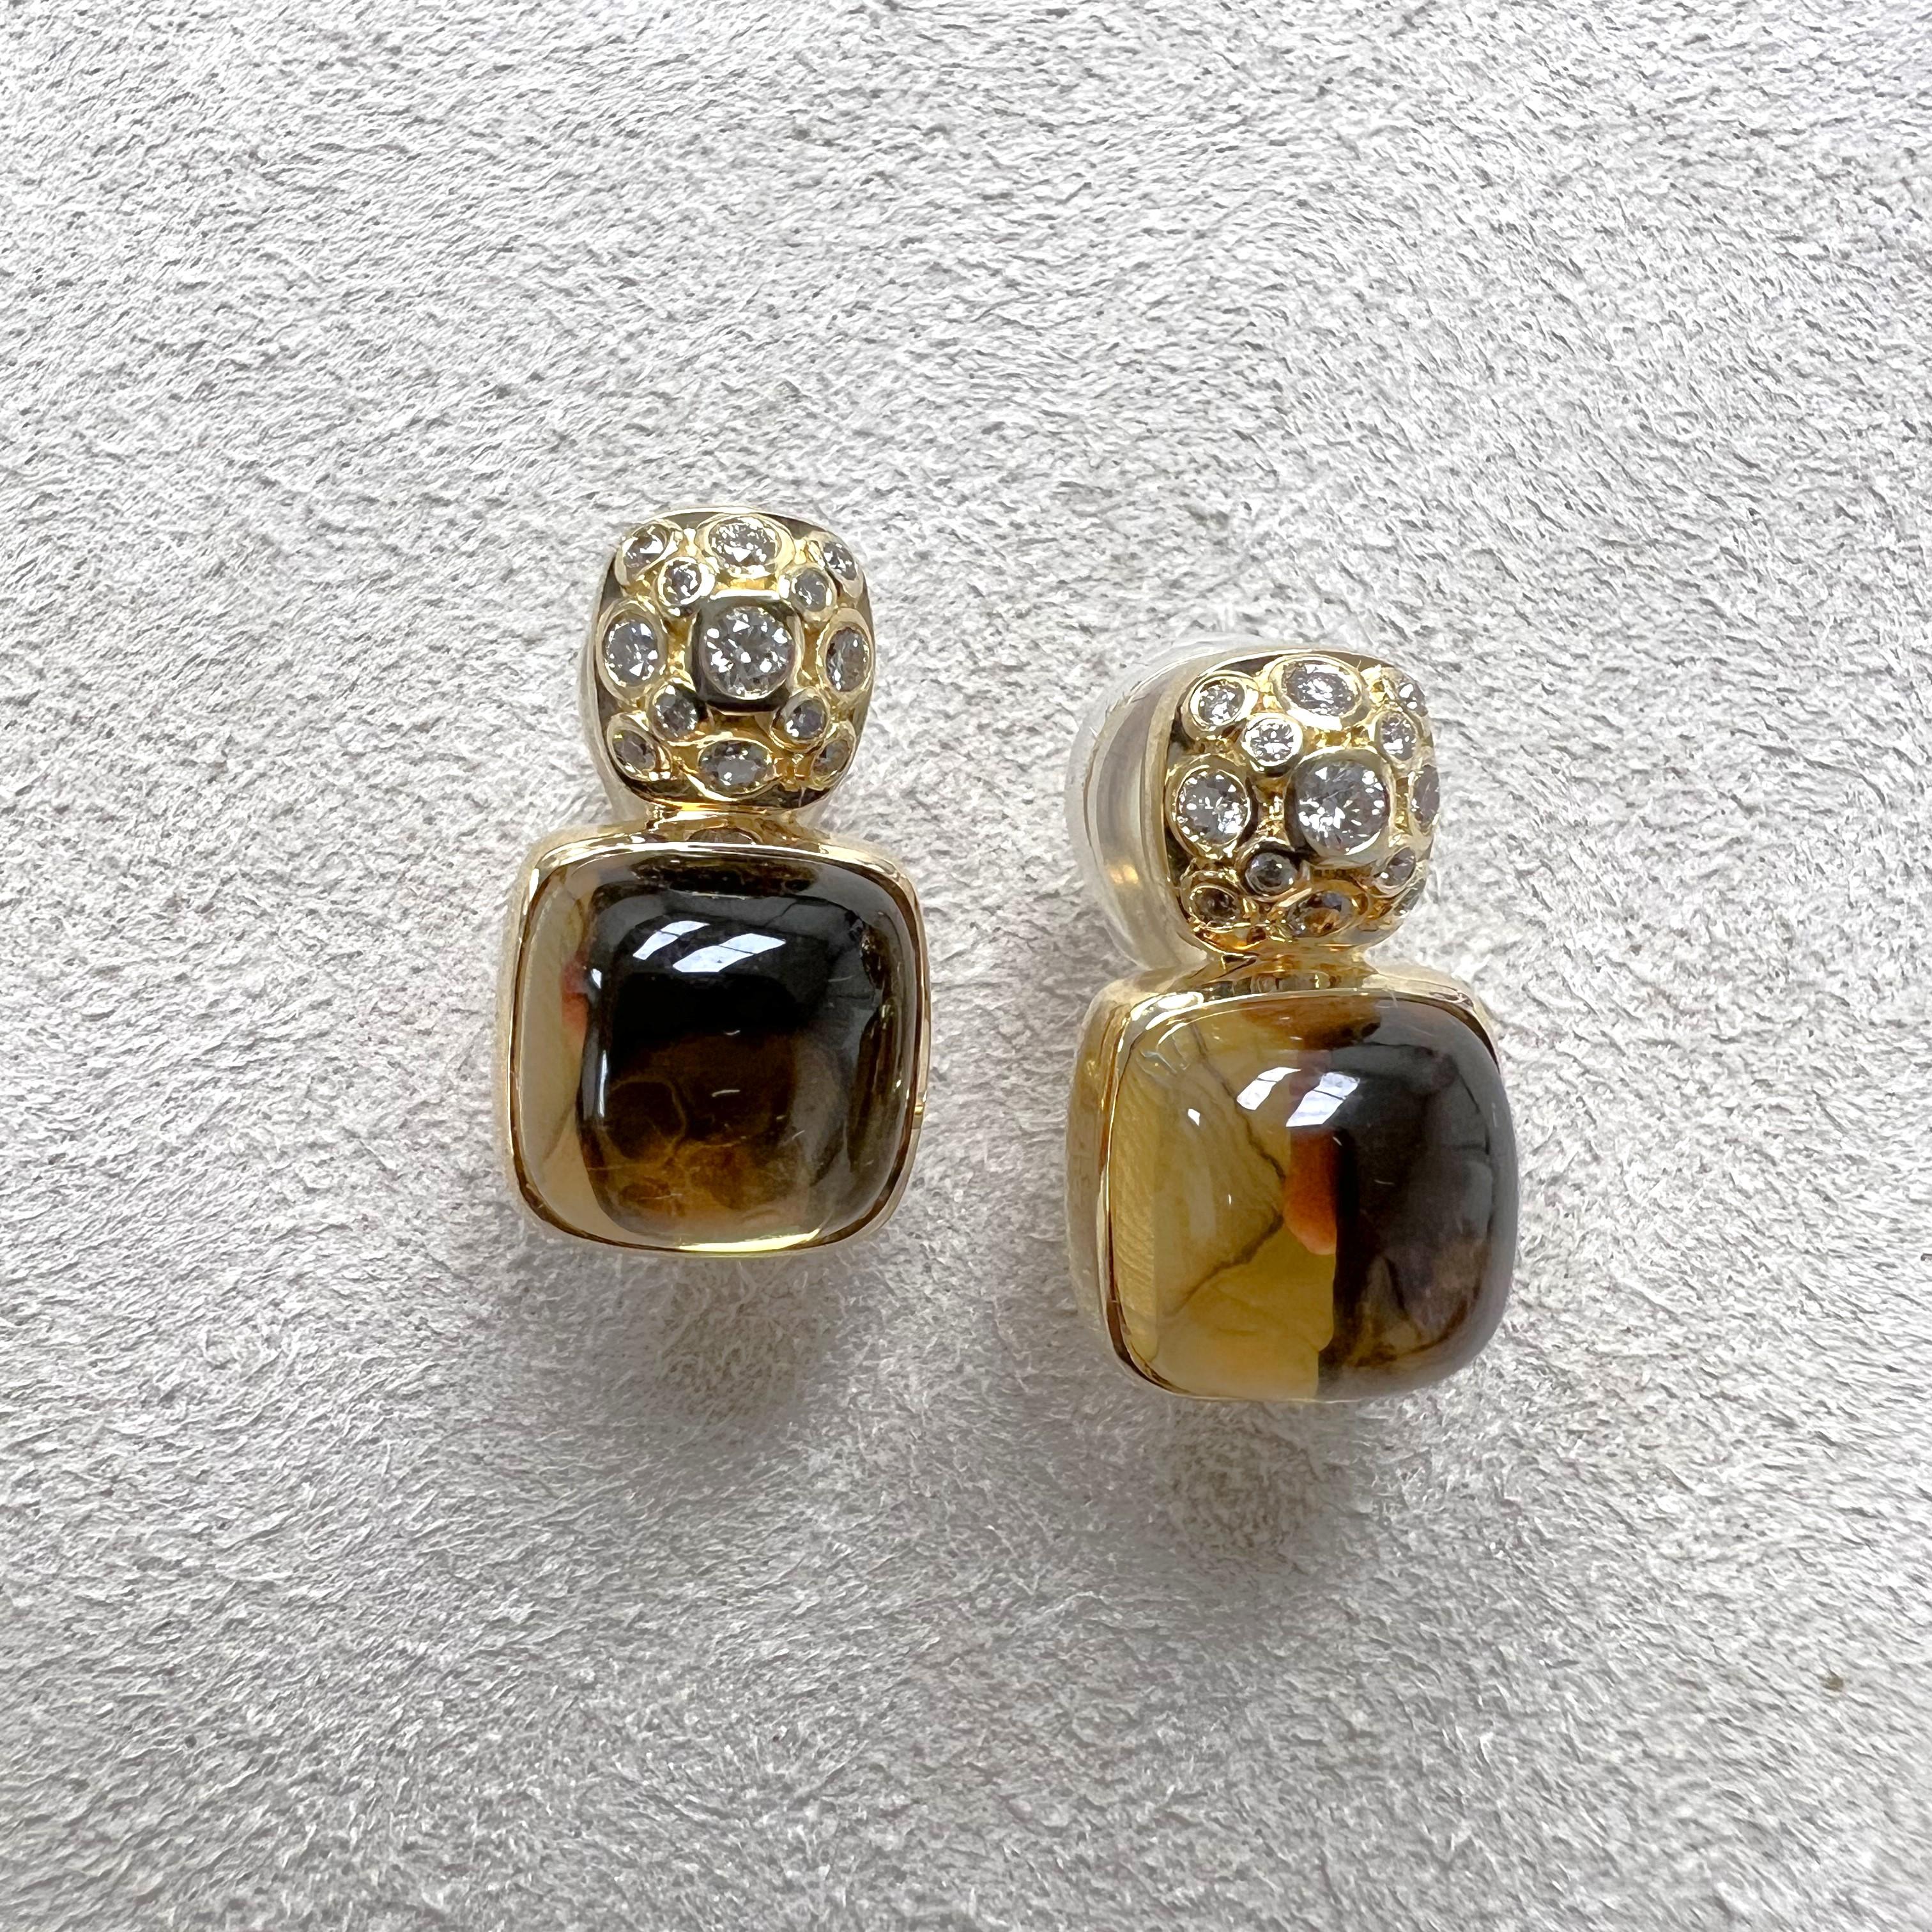 Created in 18 karat yellow gold
Citrine 12 carats approx.
Diamonds 0.30 carat approx.
Omega clip backs
Limited edition

Crafted from 18 karat yellow gold, these elegant earrings feature luxurious citrine boasting an approximate 12 carat weight and